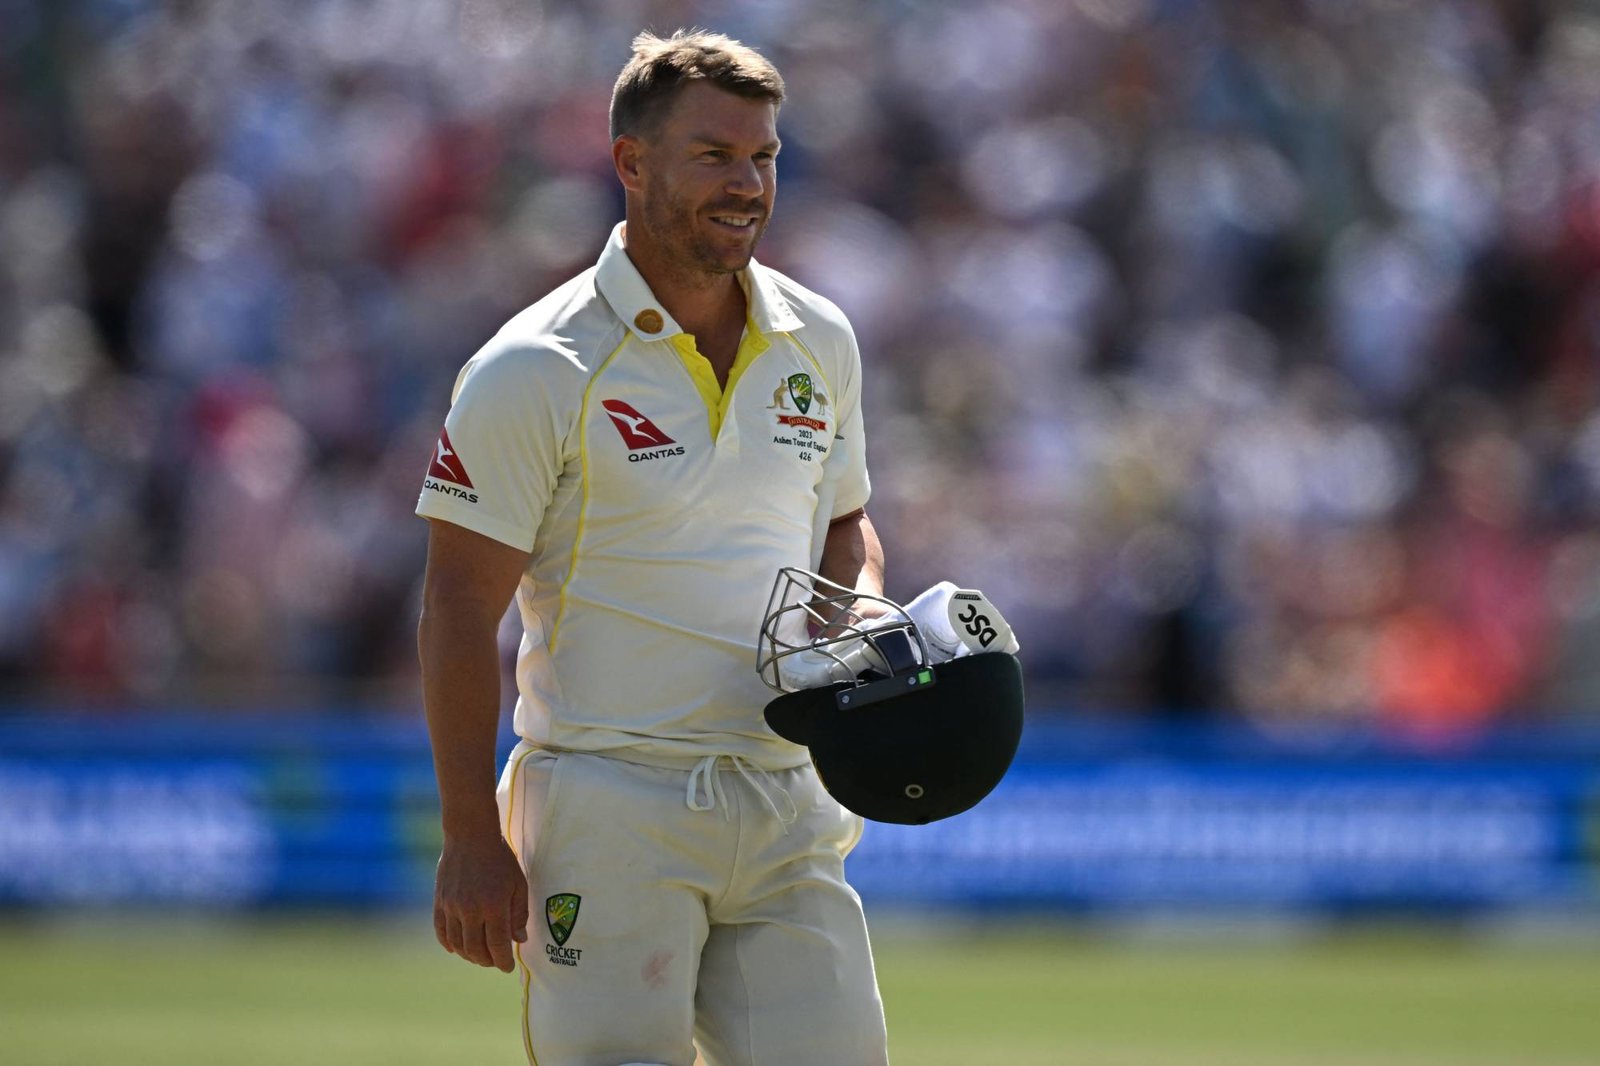 Ricky Ponting Discloses Whether David Warner Will Play In Manchester In Ashes 2023